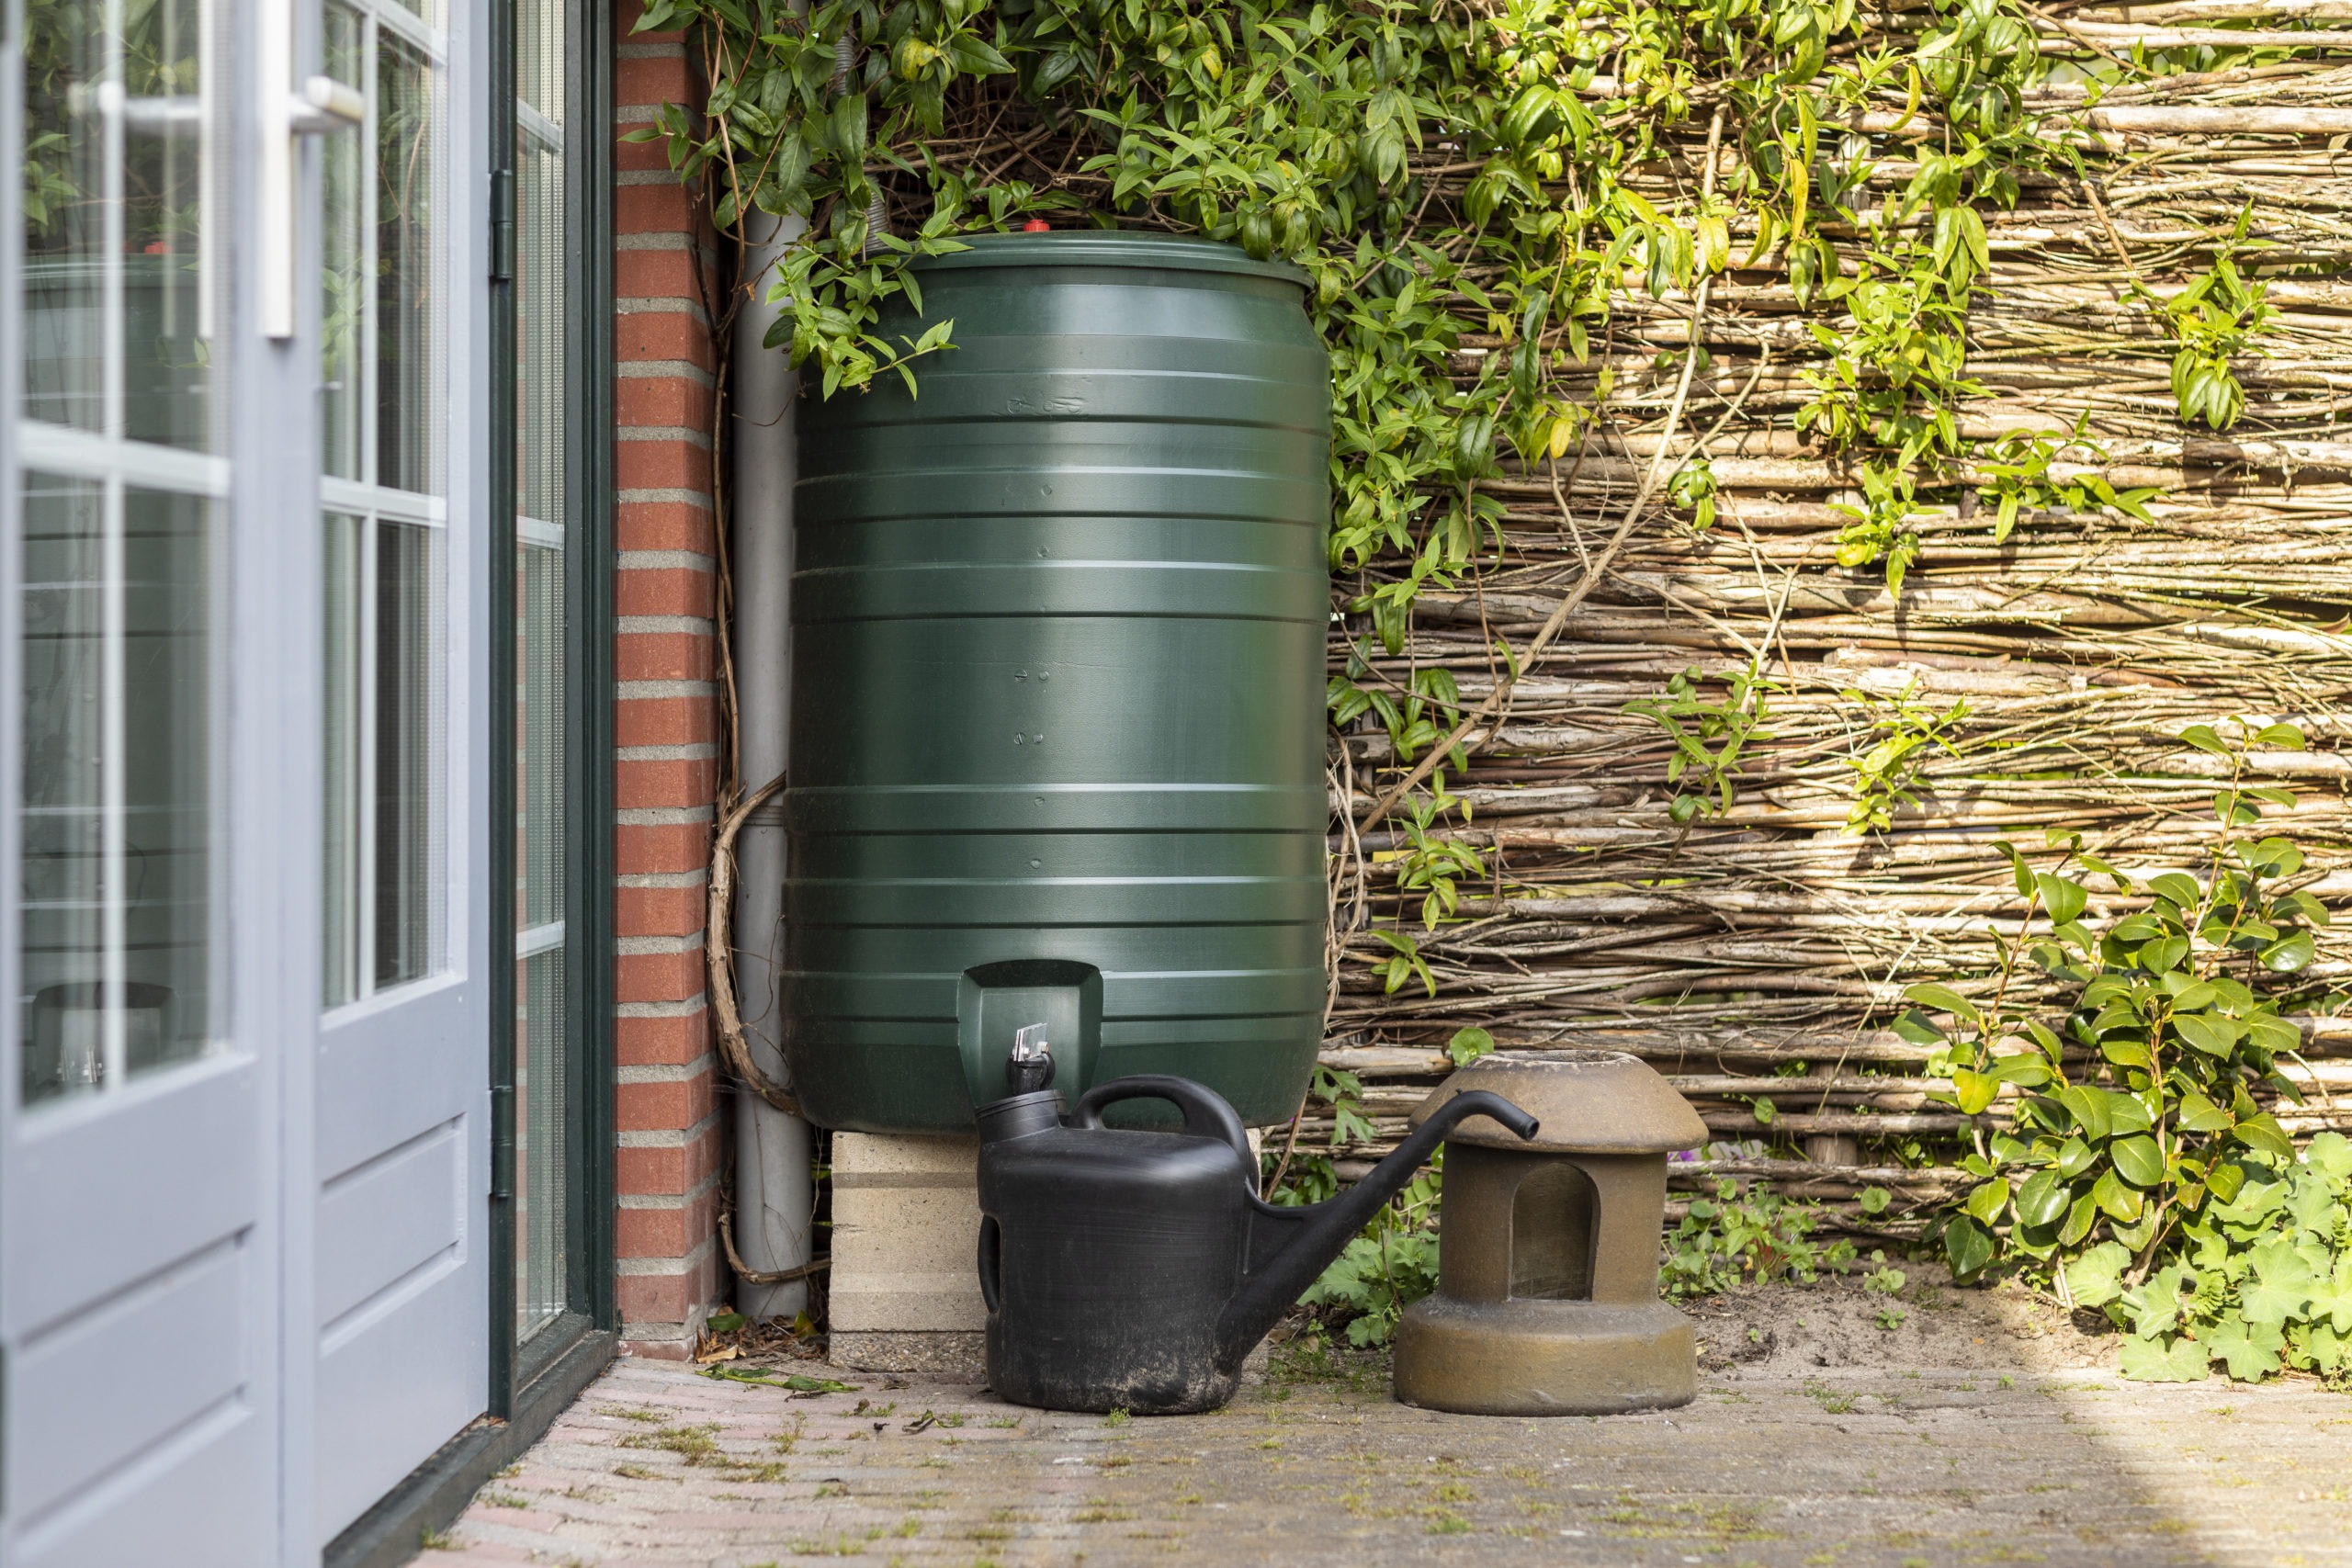 A green rain barrel to collect rainwater and reusing it to water